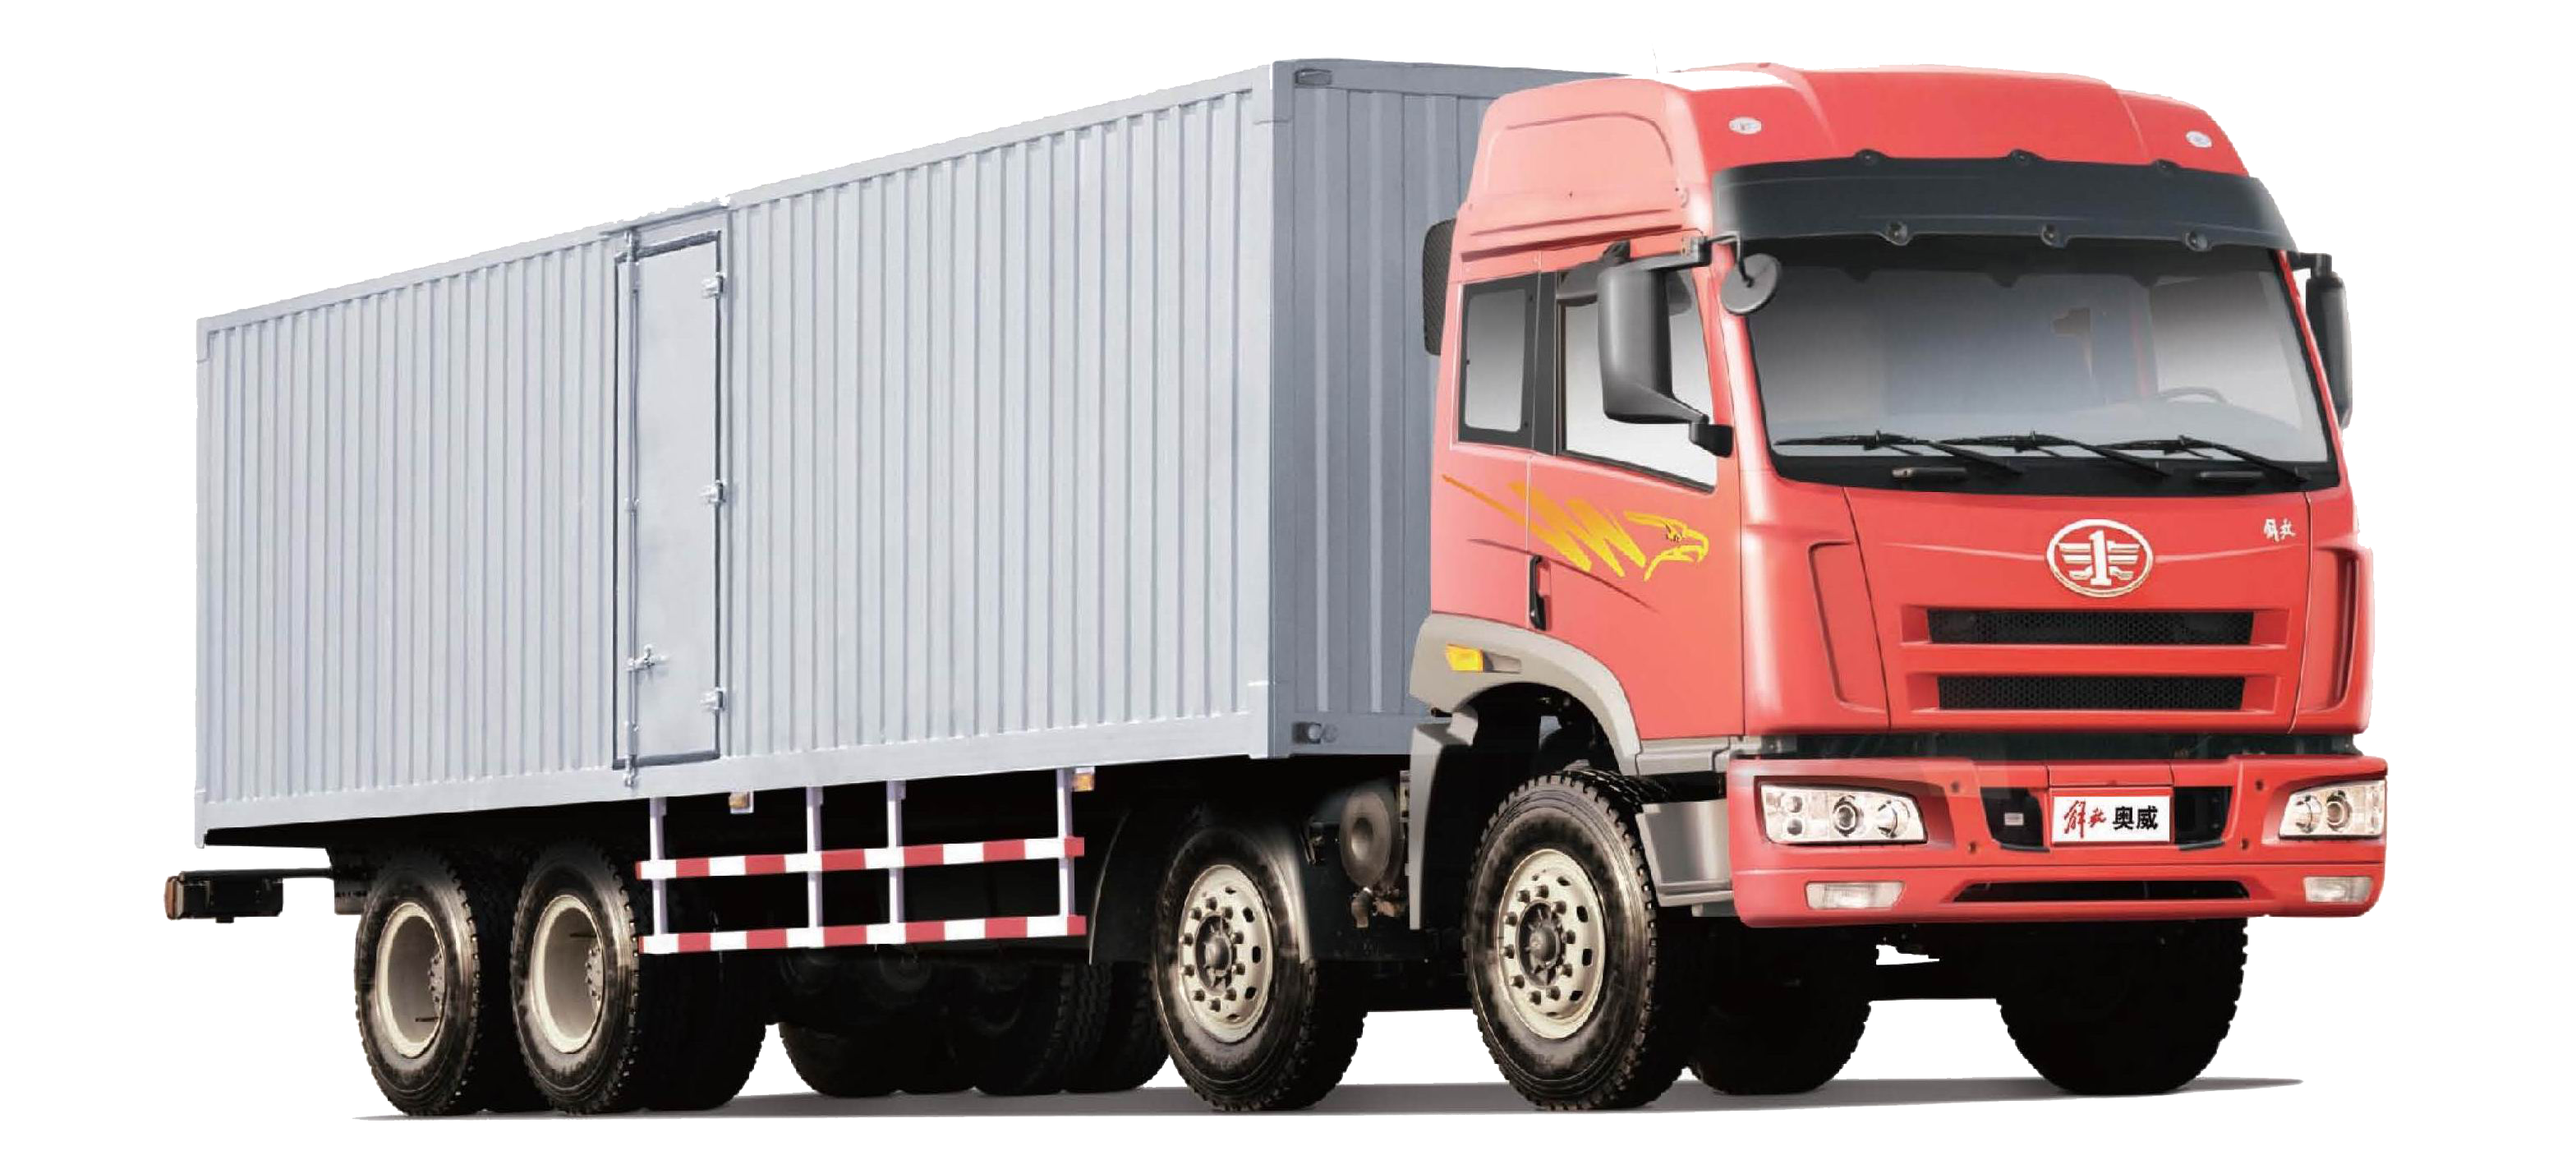 Cargo Container Trucks PNG - 137819